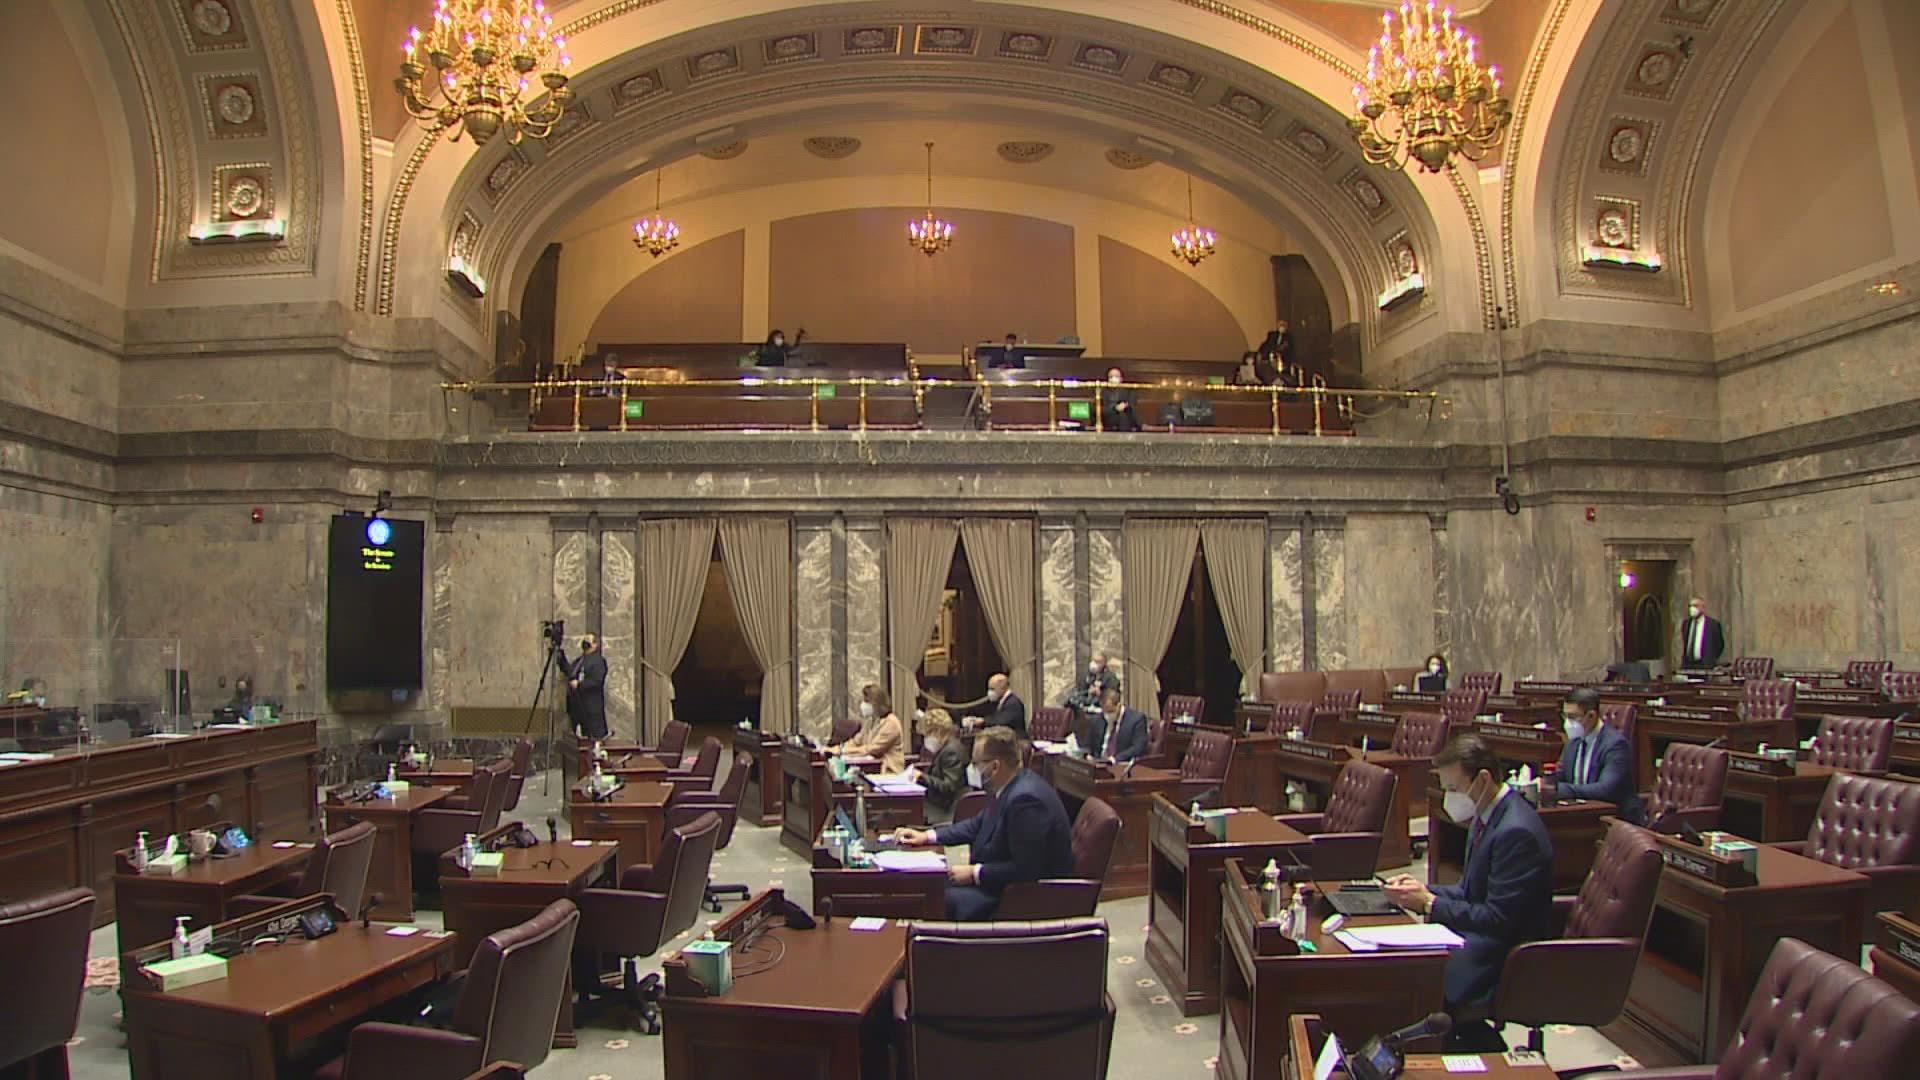 Bills that could change the rules of the road and guarantee abortion rights within the state’s constitution were highlighted in the third week.